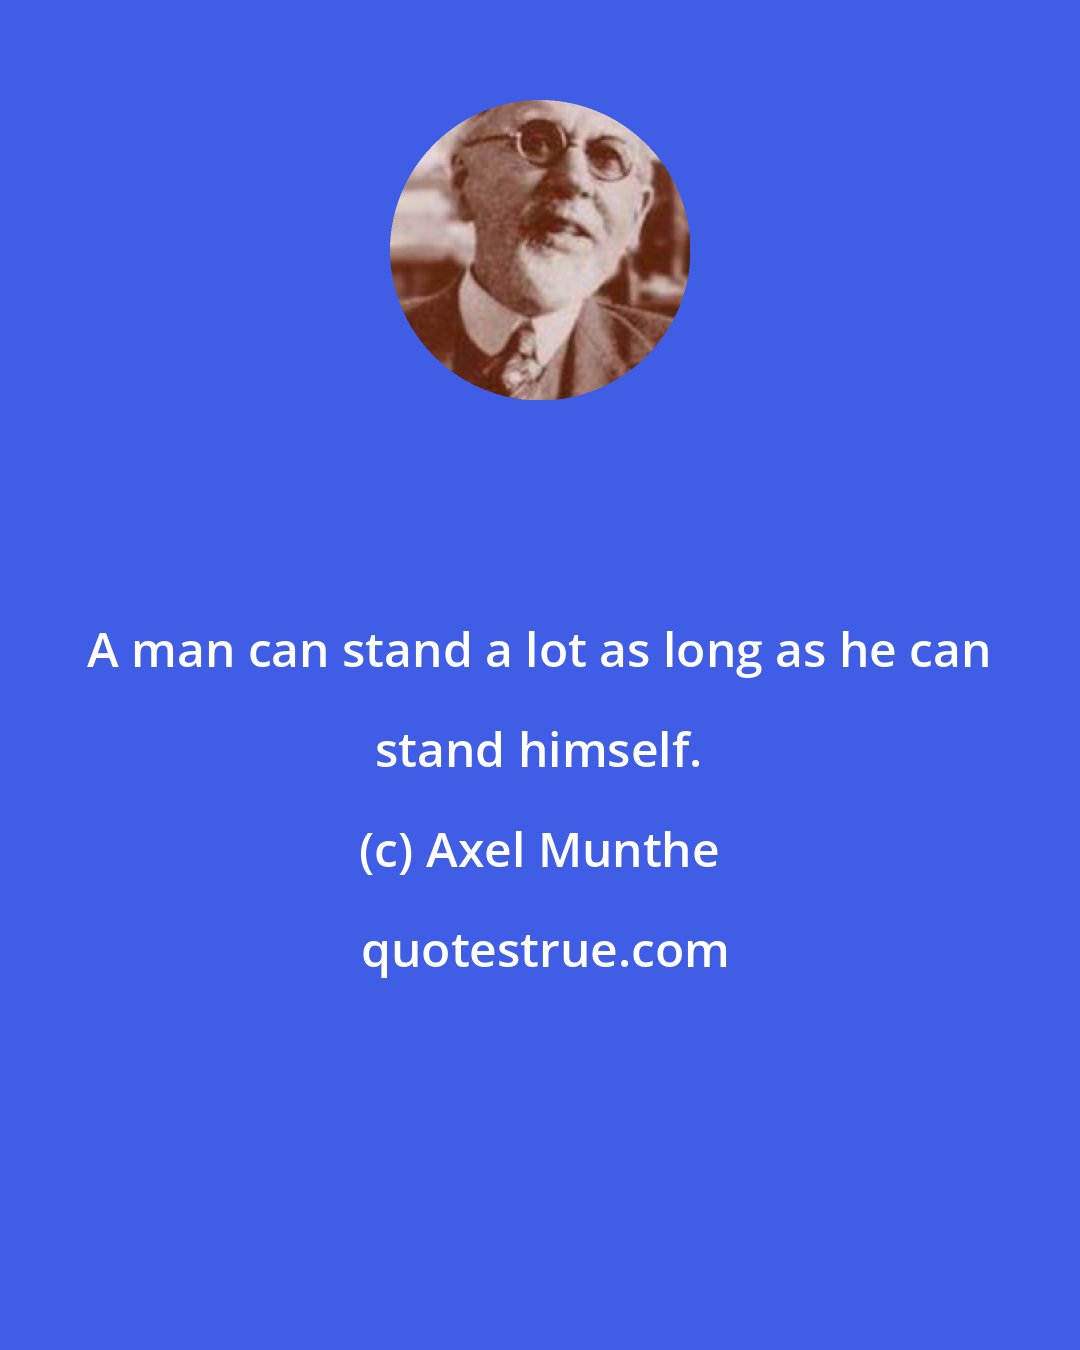 Axel Munthe: A man can stand a lot as long as he can stand himself.